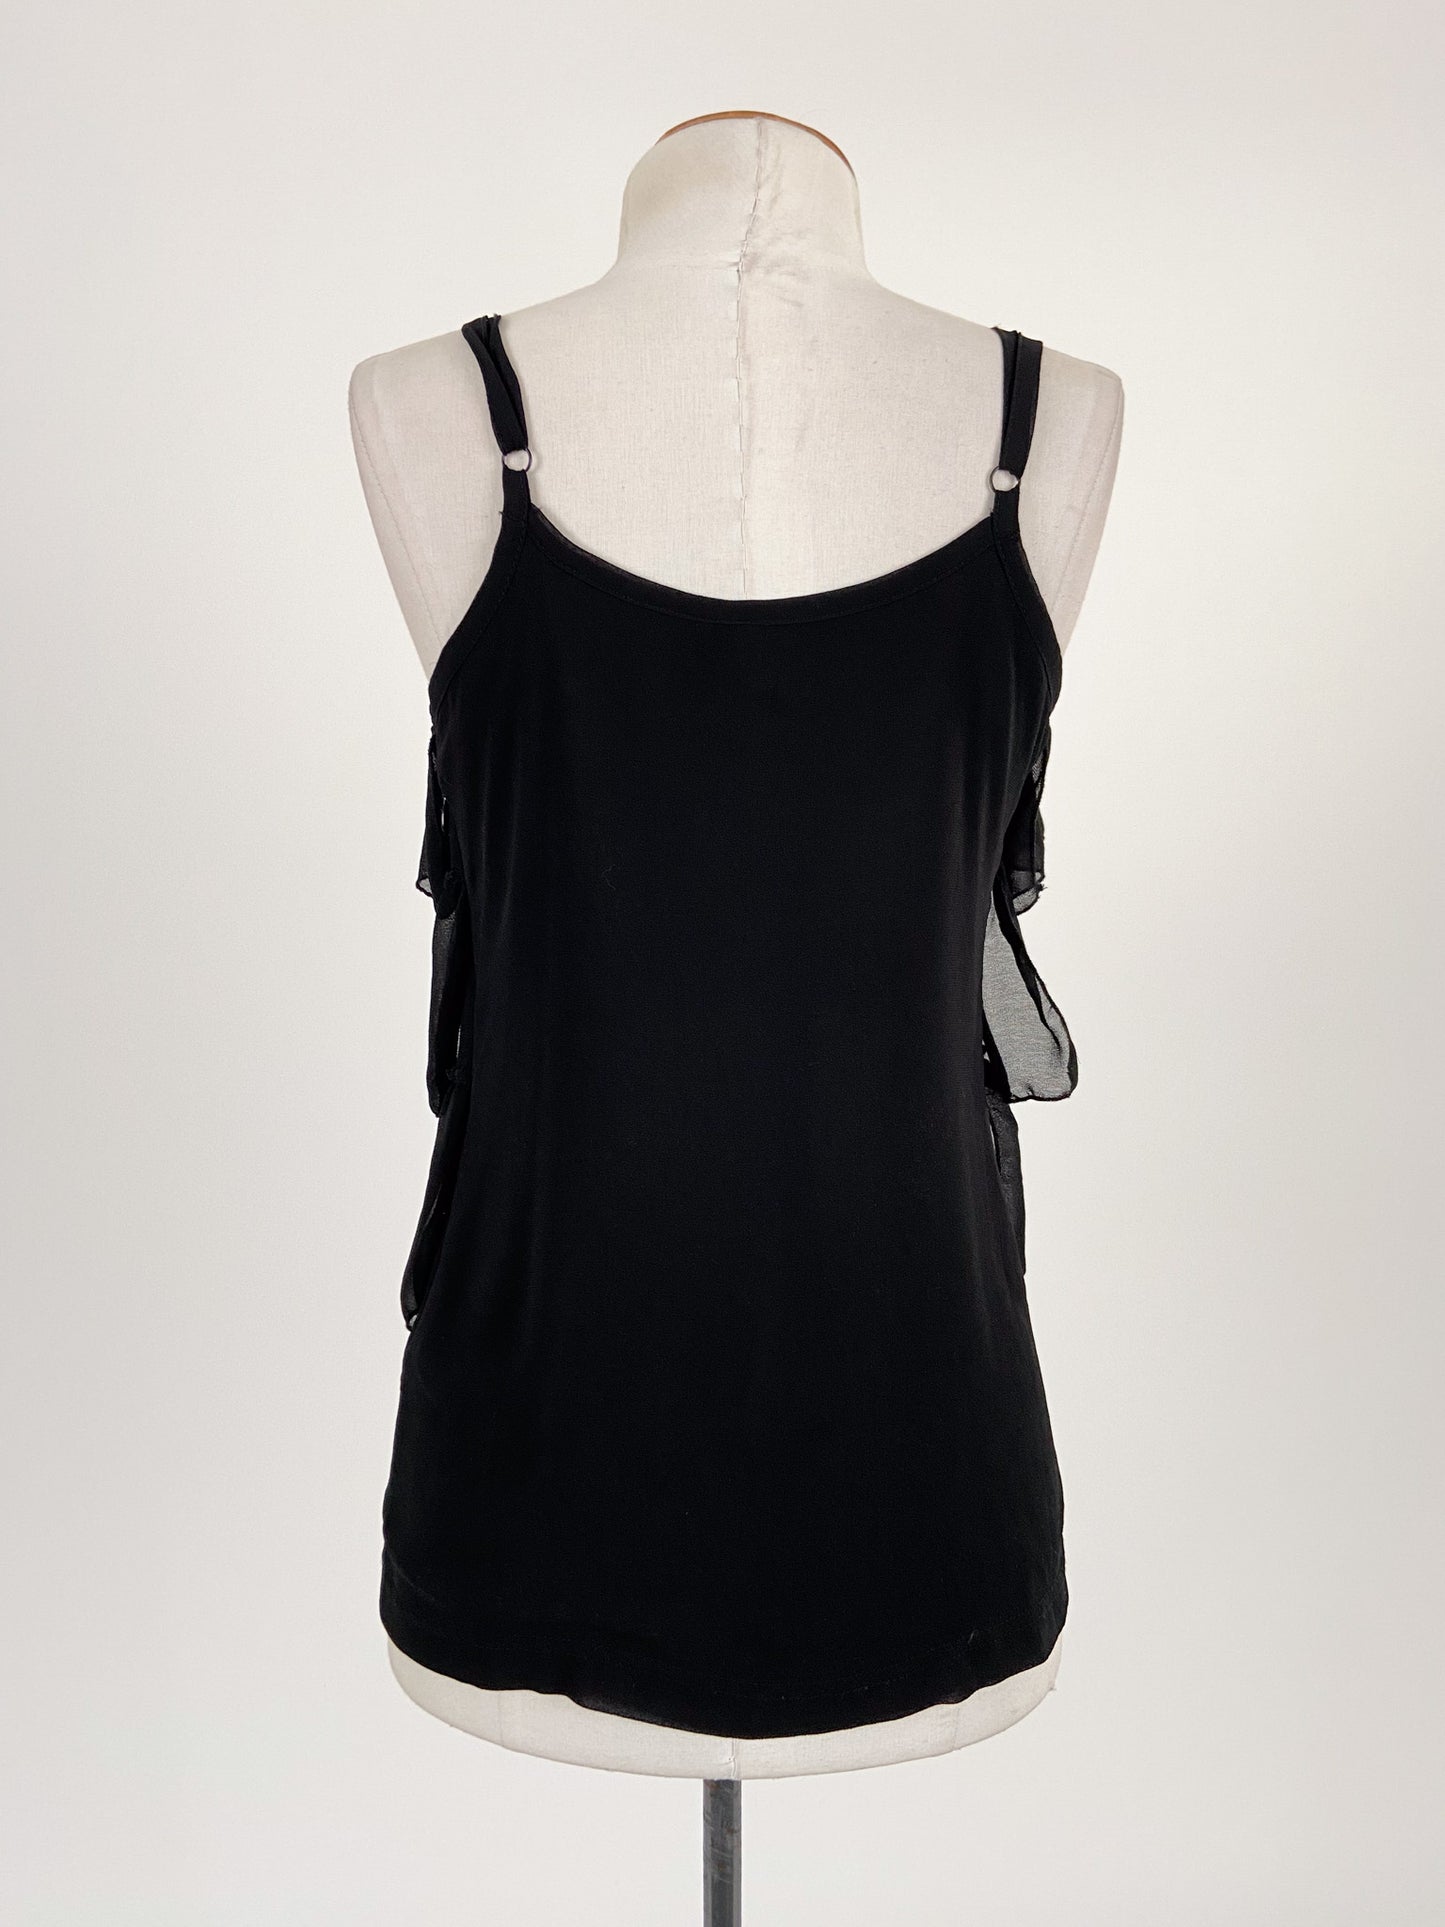 Glassons | Black Casual Top | Size 8